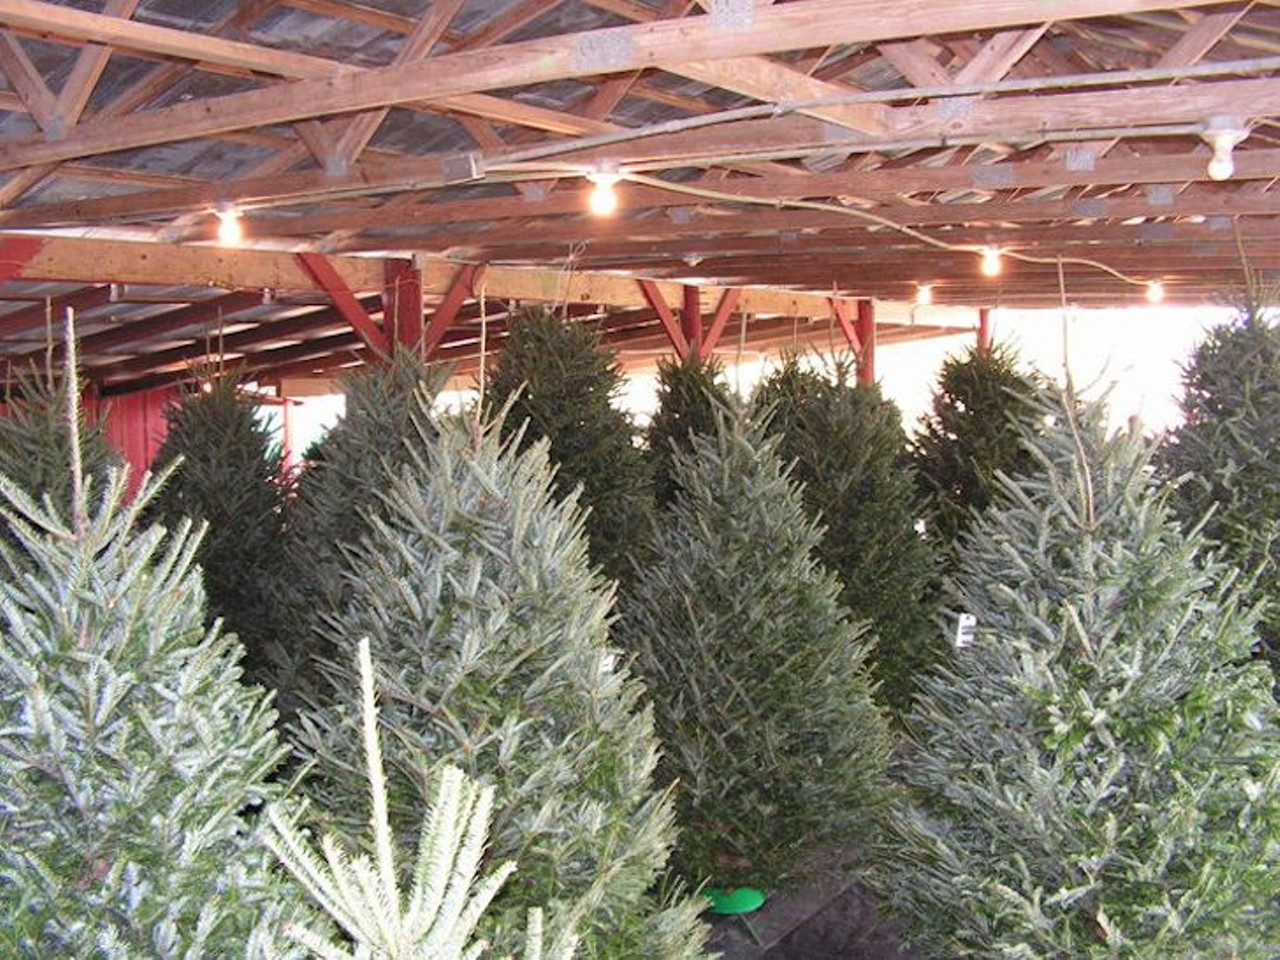 Lazy Lay Acres Christmas Tree Farm
14920 Swift Road, Dade City; 352-567-6808 
The Lay family&#146;s farm has a way of making you feel you&#146;re not in Florida -- that is, until you realize it&#146;s over 70 degrees outside in December. It&#146;s an ideal spot for those who enjoy looking for trees but hate the fuss of perfecting them. Don&#146;t fret; farm helpers are there to shake, bale, and help you escort your tree into your car. Open every day from 9 a.m. to 6 p.m. through December 24.
Photo via Lazy Lay Acres/Facebook